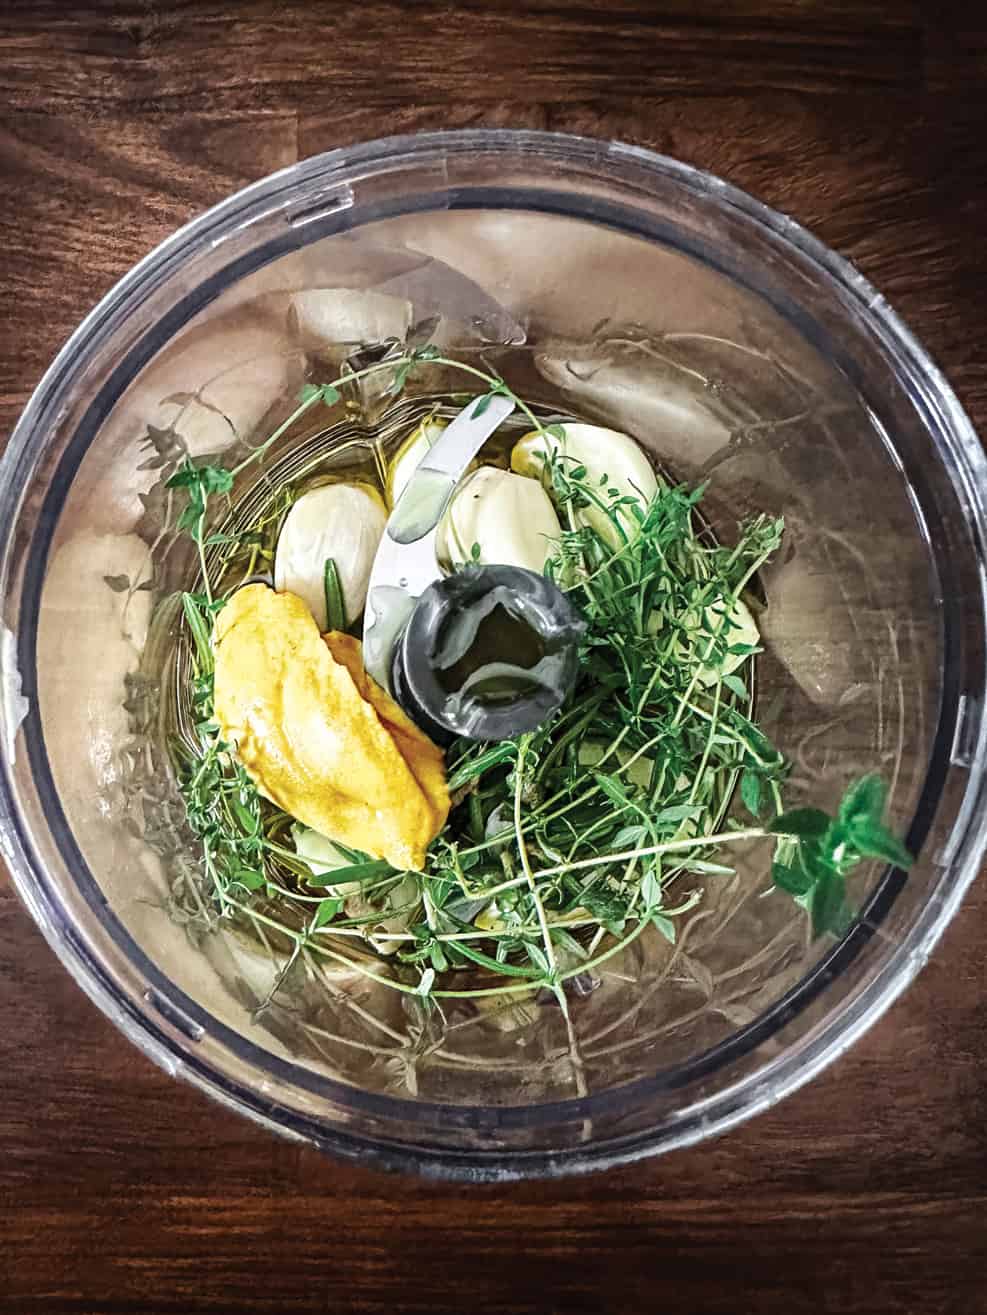 A food processor bowl with garlic, thyme sprigs, and dijon mustard.